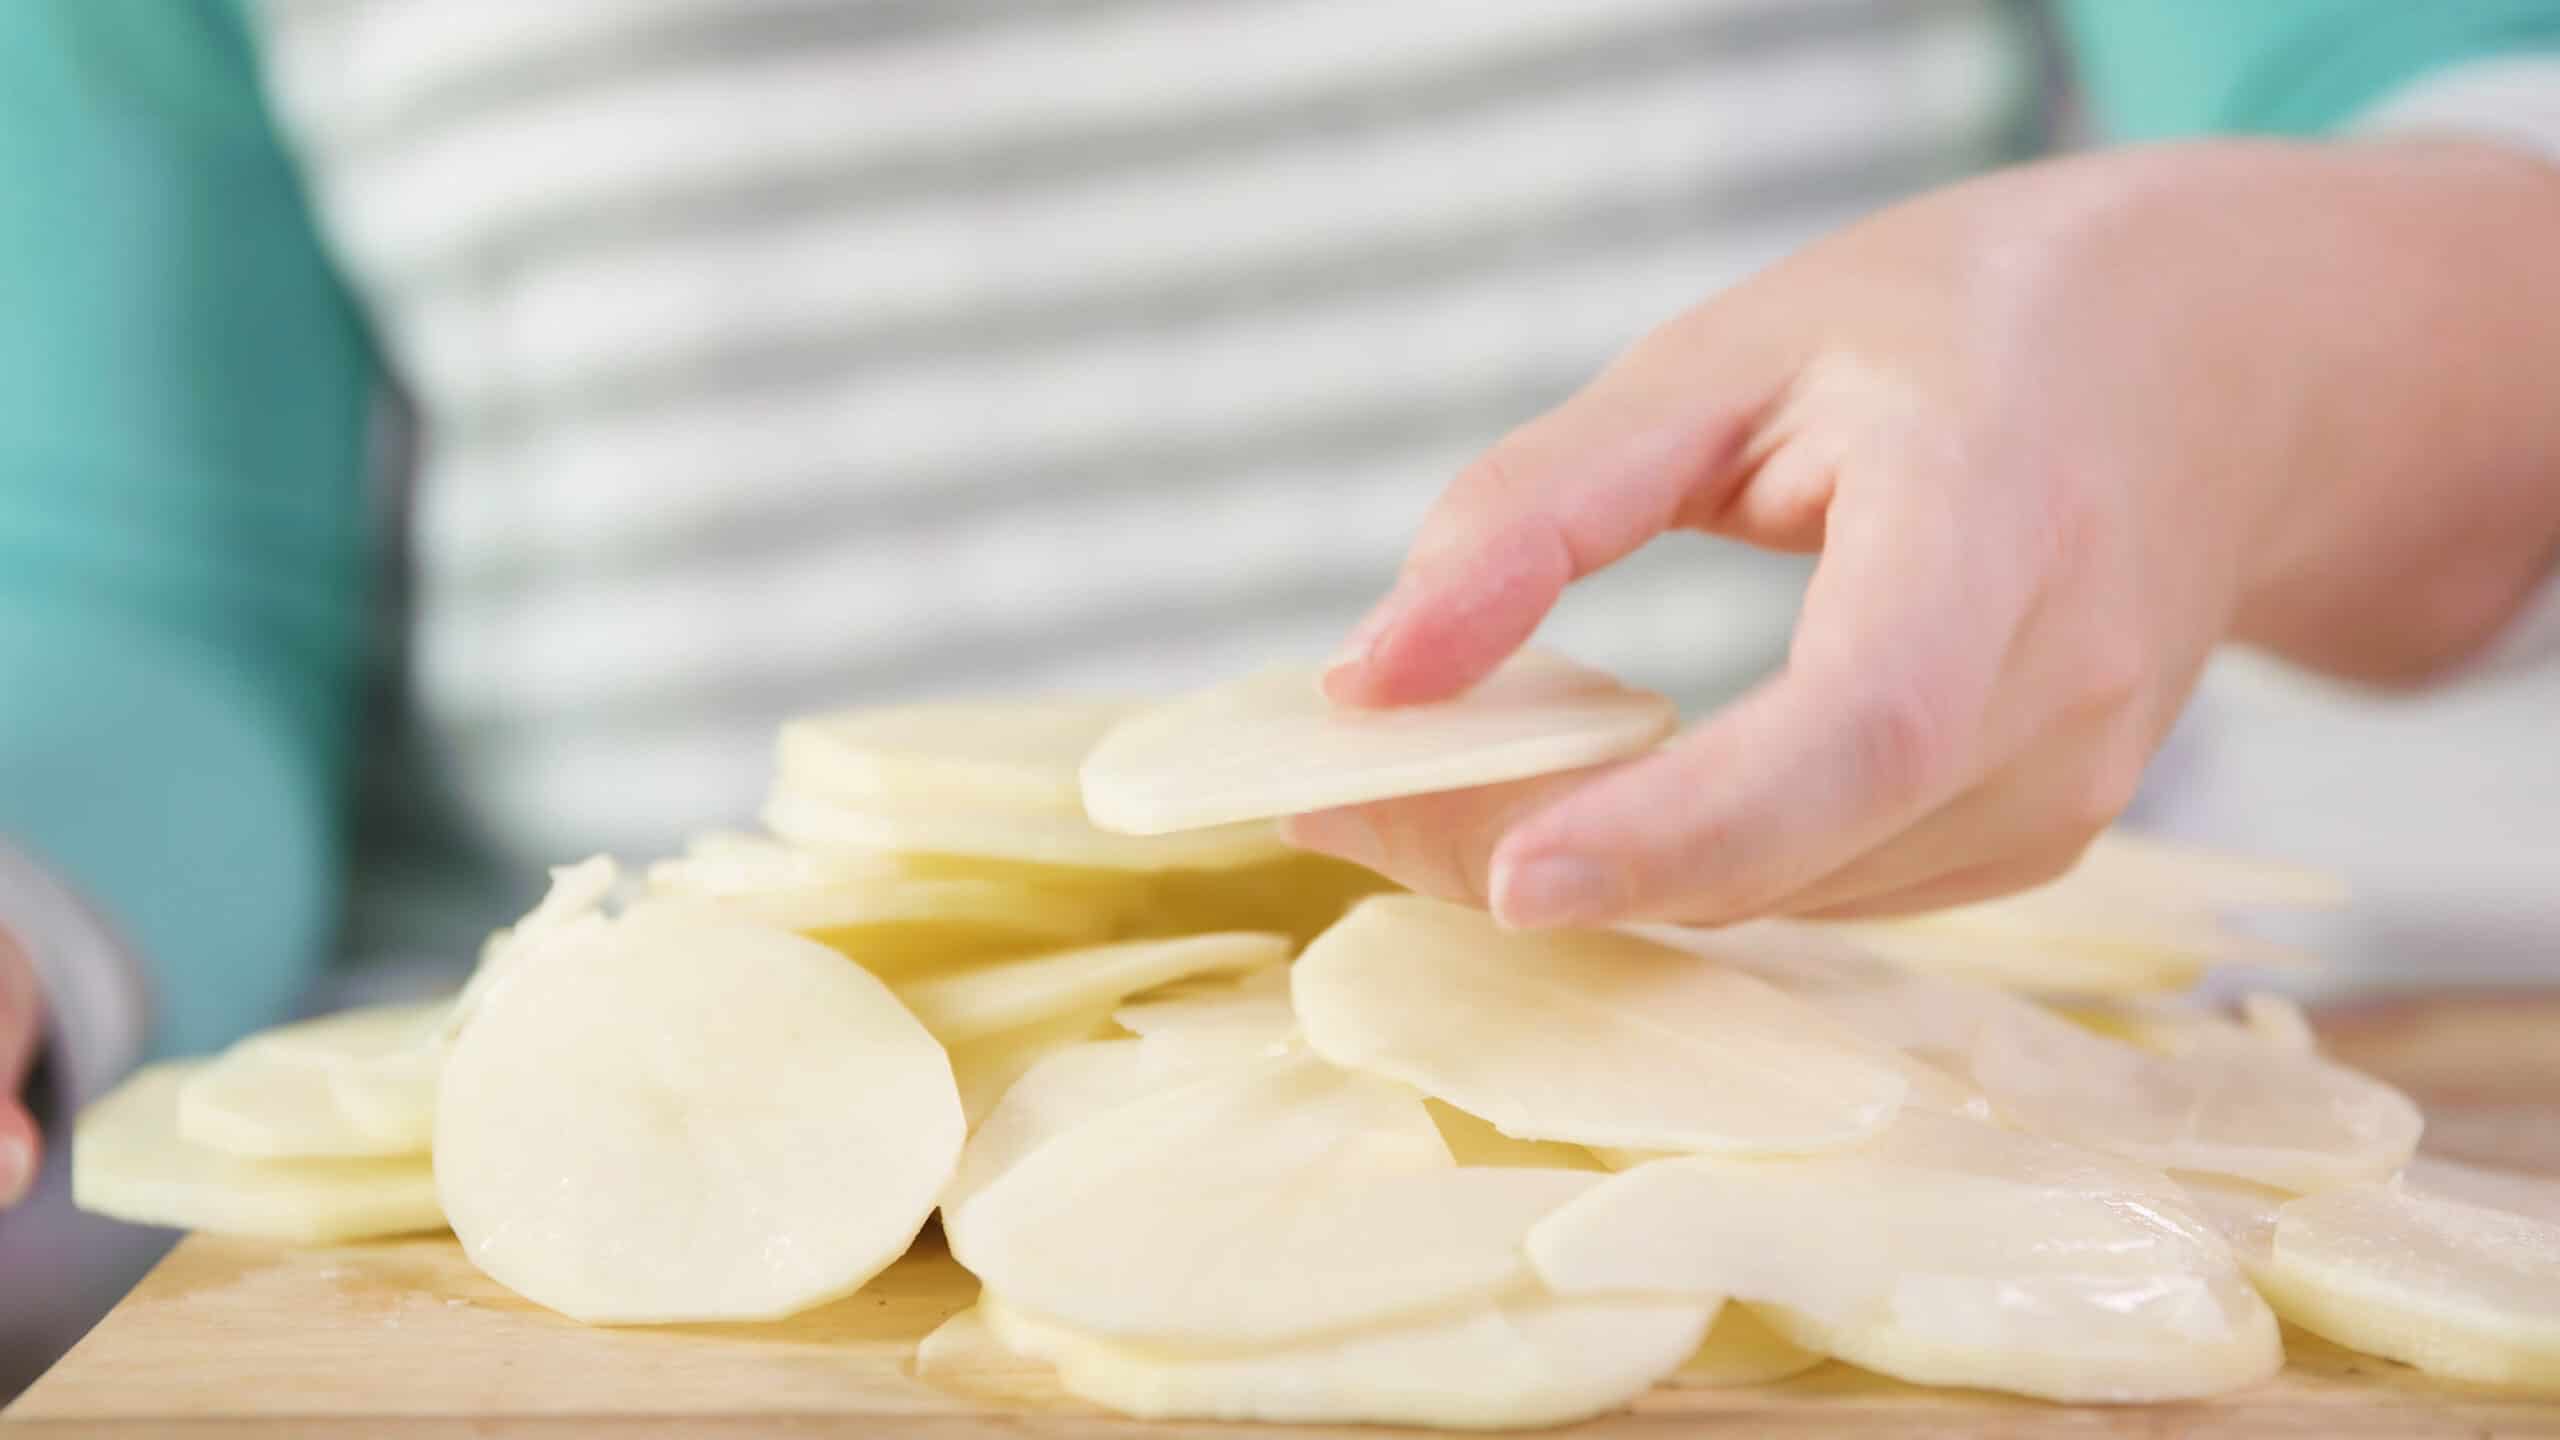 Close-up view of thinly sliced and peeled russet potatoes on cutting board.